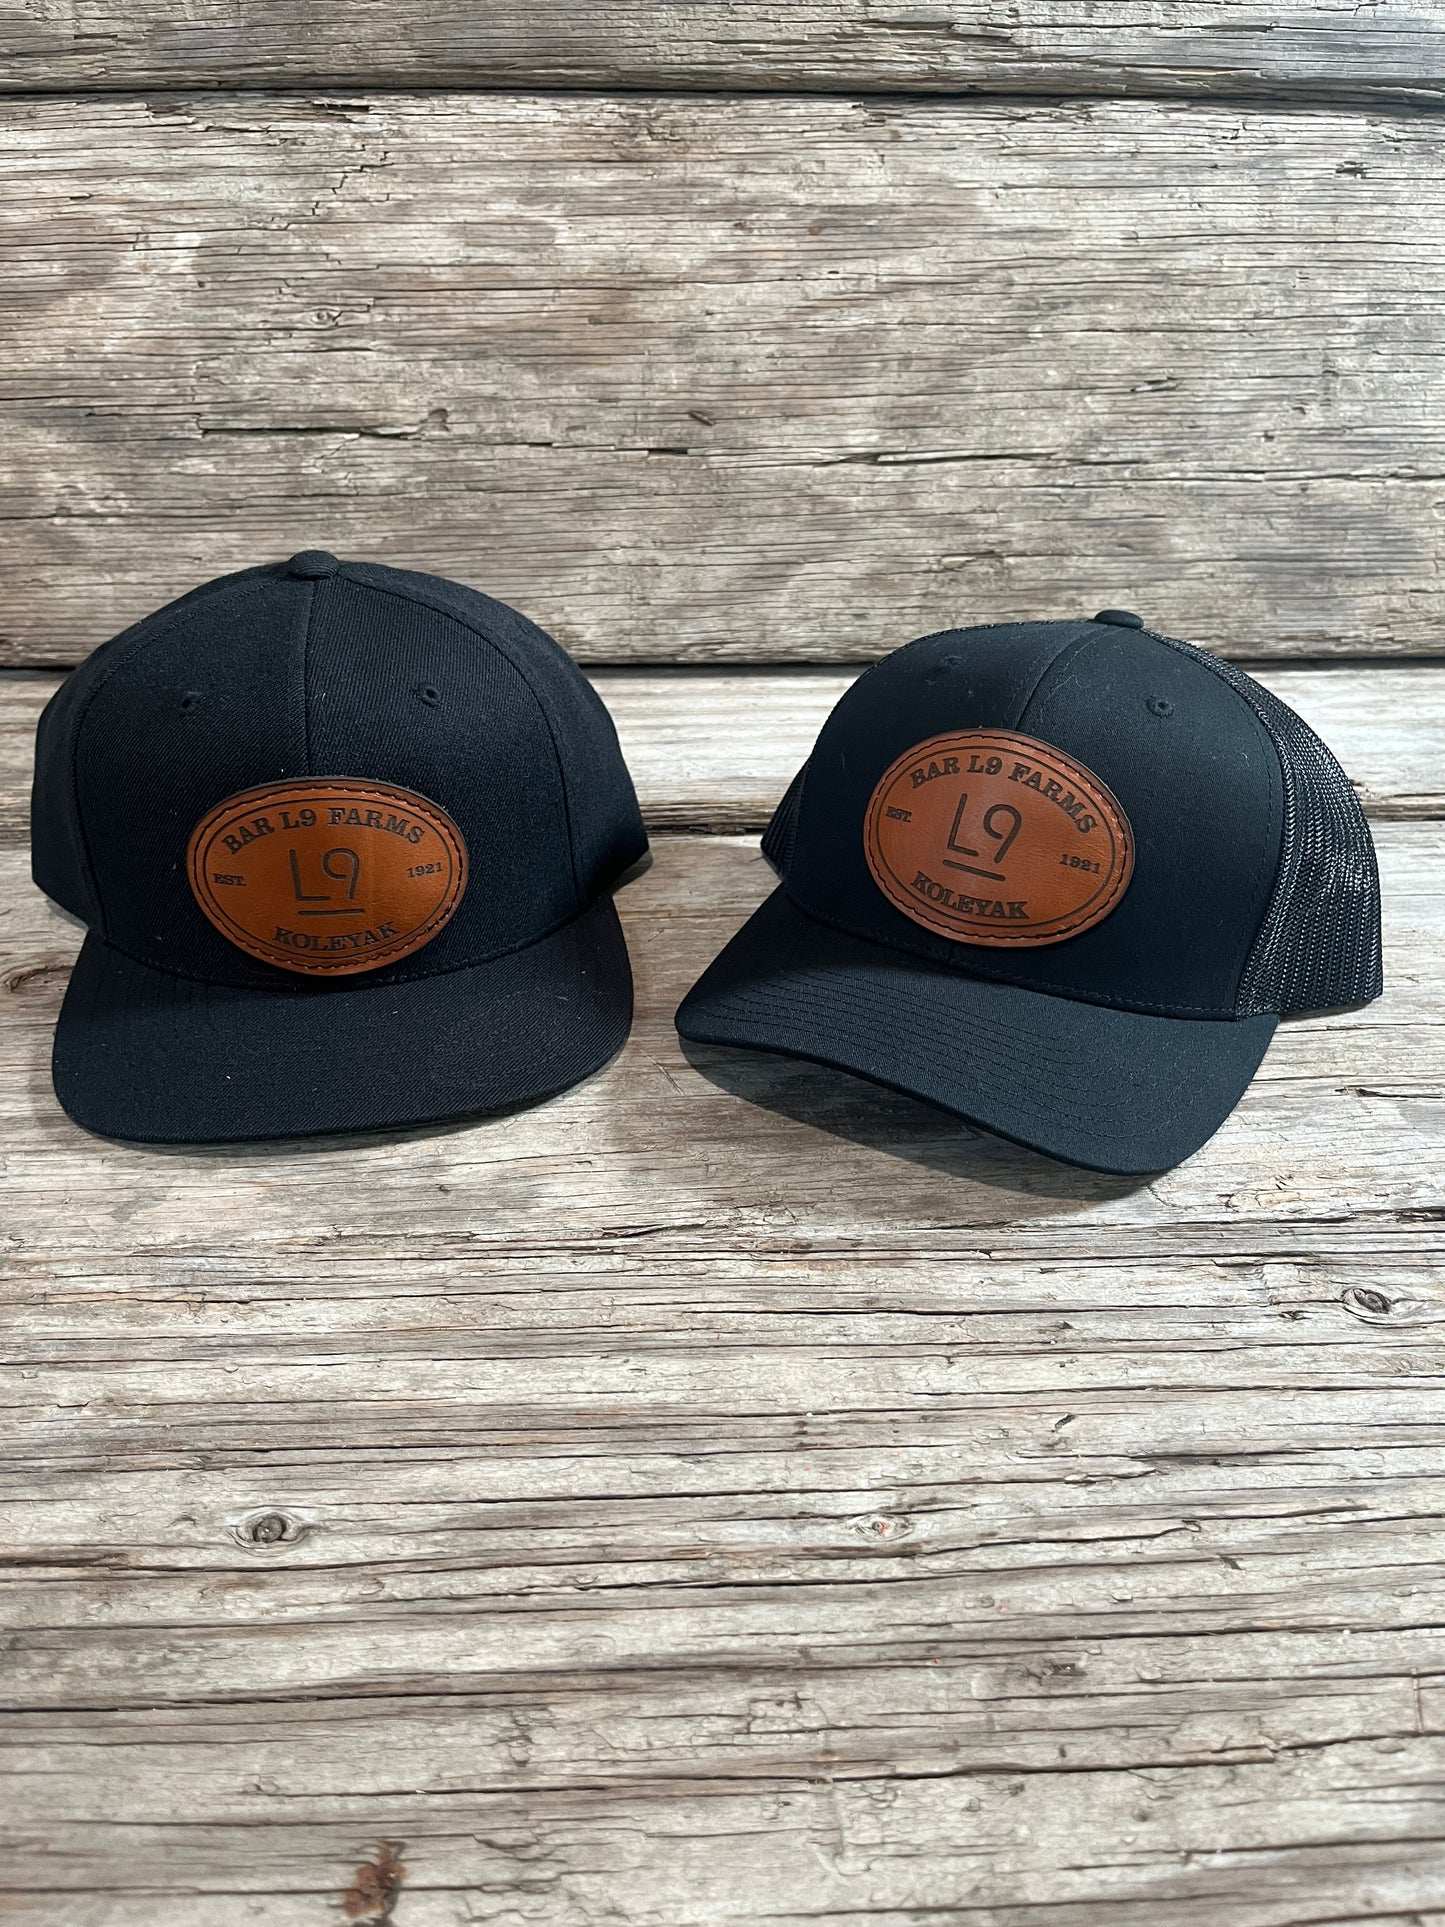 Ball cap with custom leather patch